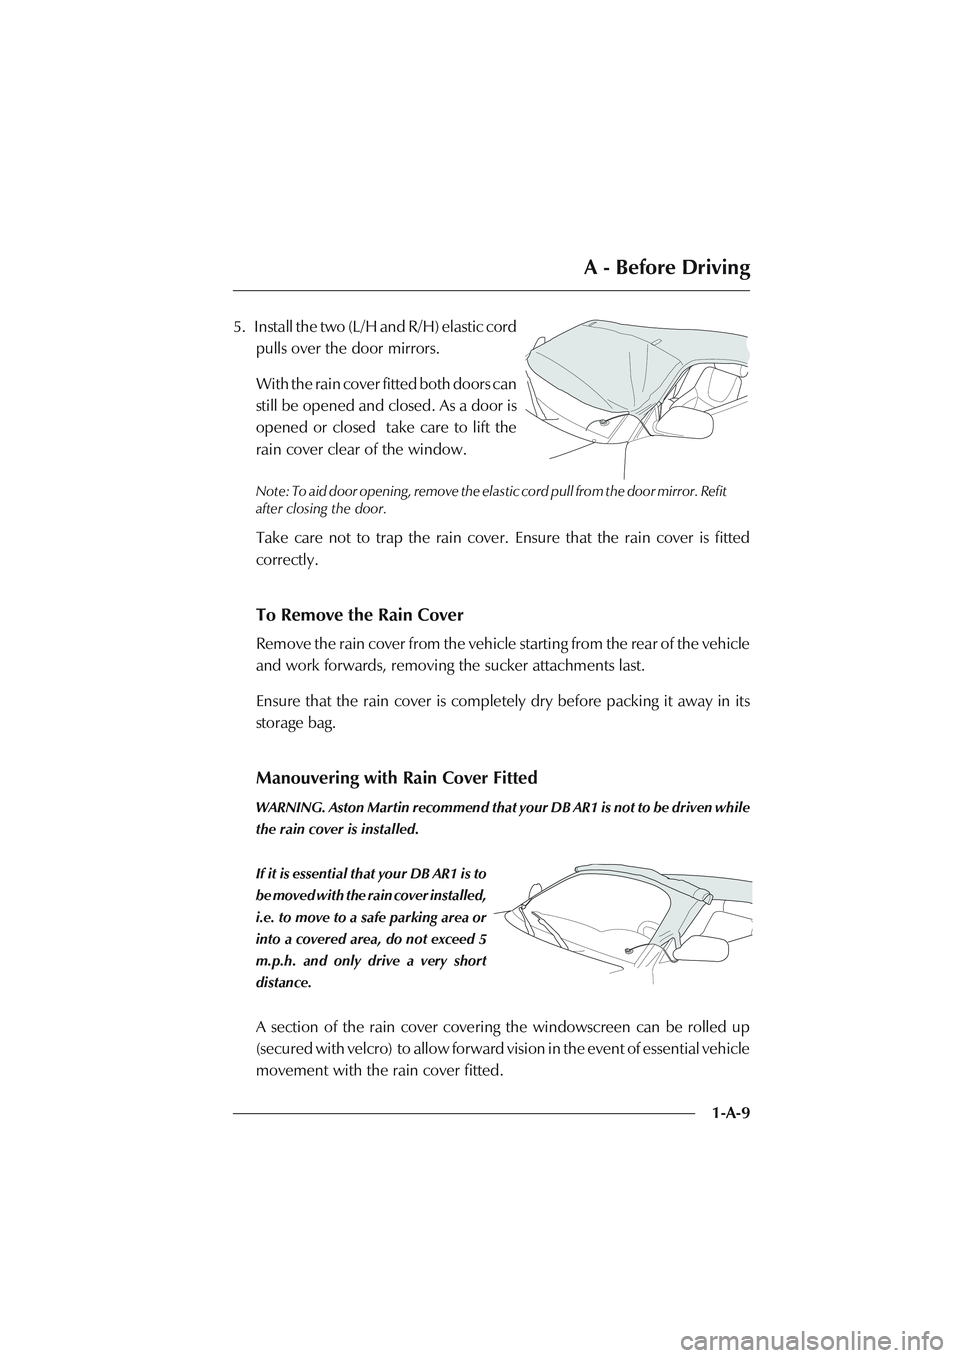 ASTON MARTIN DB AR1 Q 2003  Owners Guide A - Before Driving
1-A-9 5.   Install the two (L/H and R/H) elastic cord
pulls over the door mirrors.
With the rain cover fitted both doors can
still be opened and closed. As a door is
opened or close